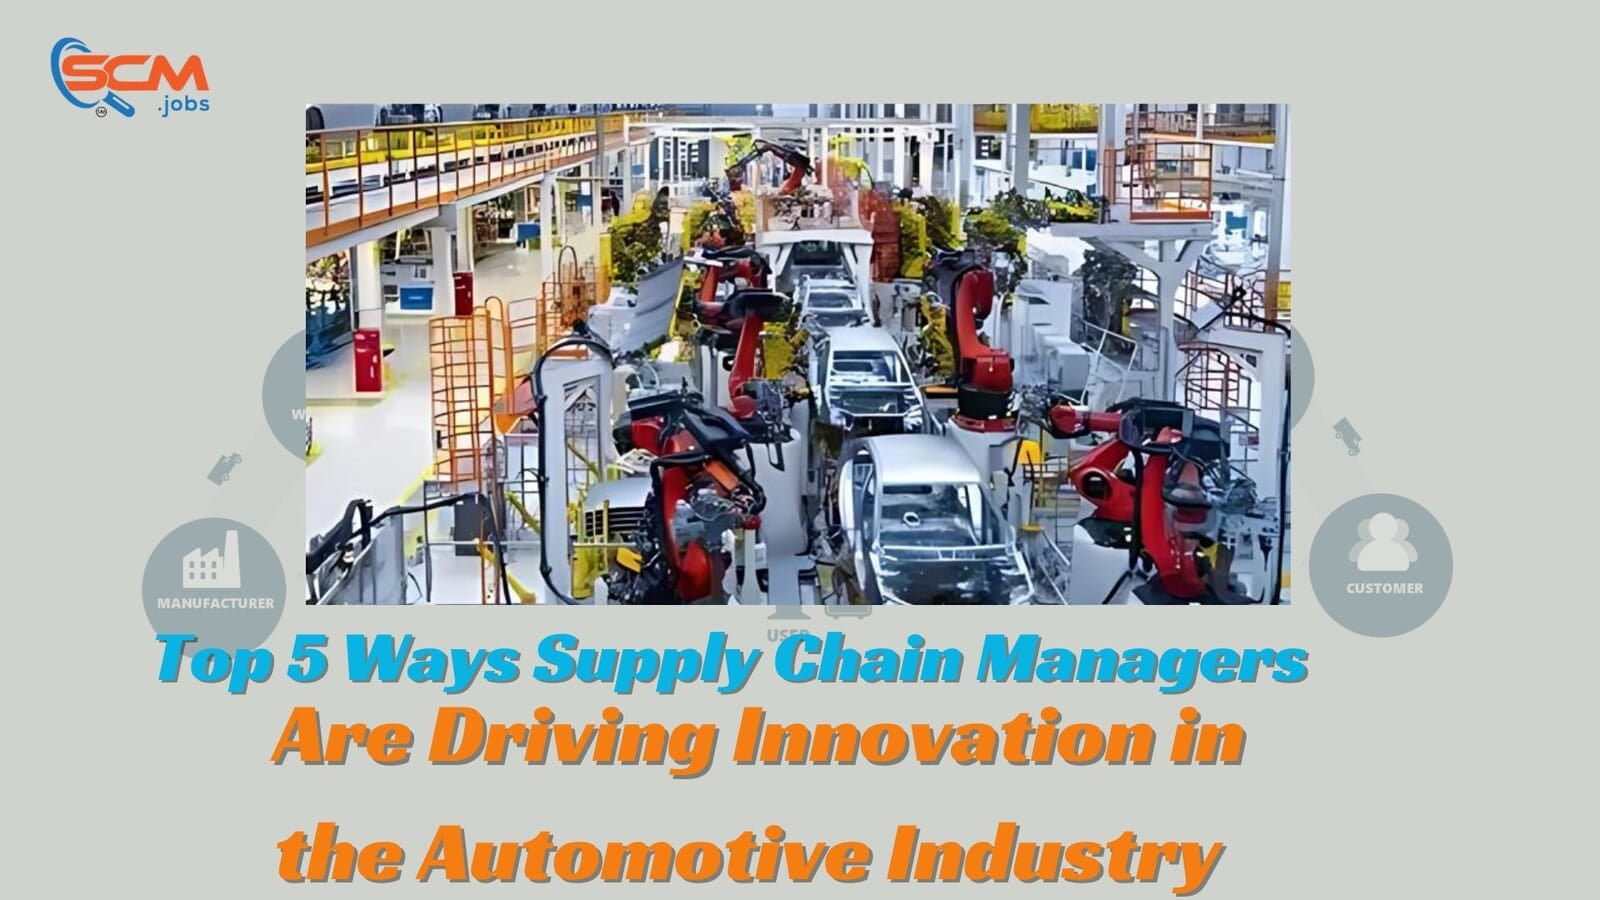 Top 5 Ways Supply Chain Managers Are Driving Innovation in the Automotive Industry